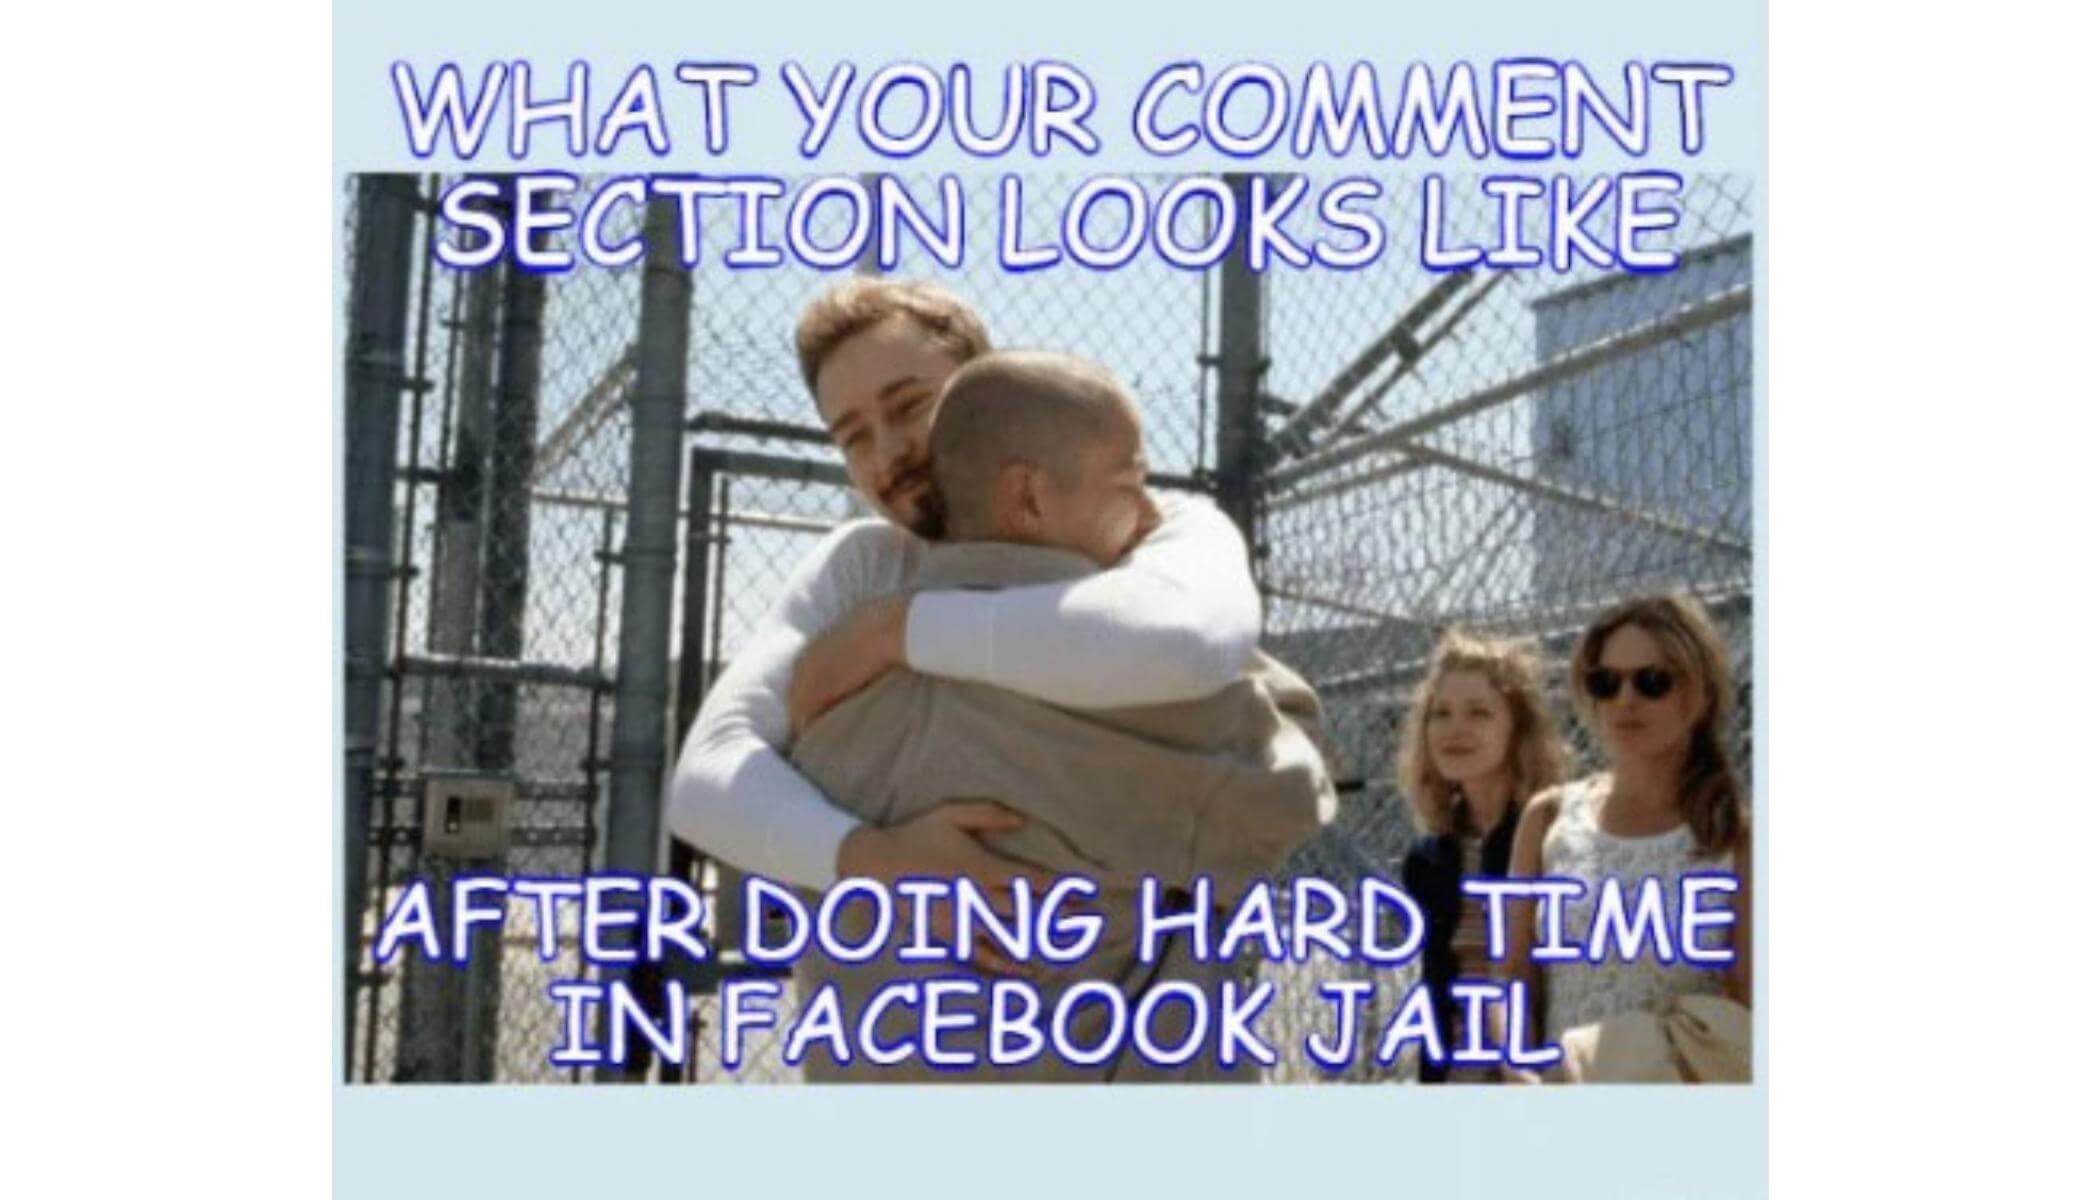 After doing a hard time in Facebook jail